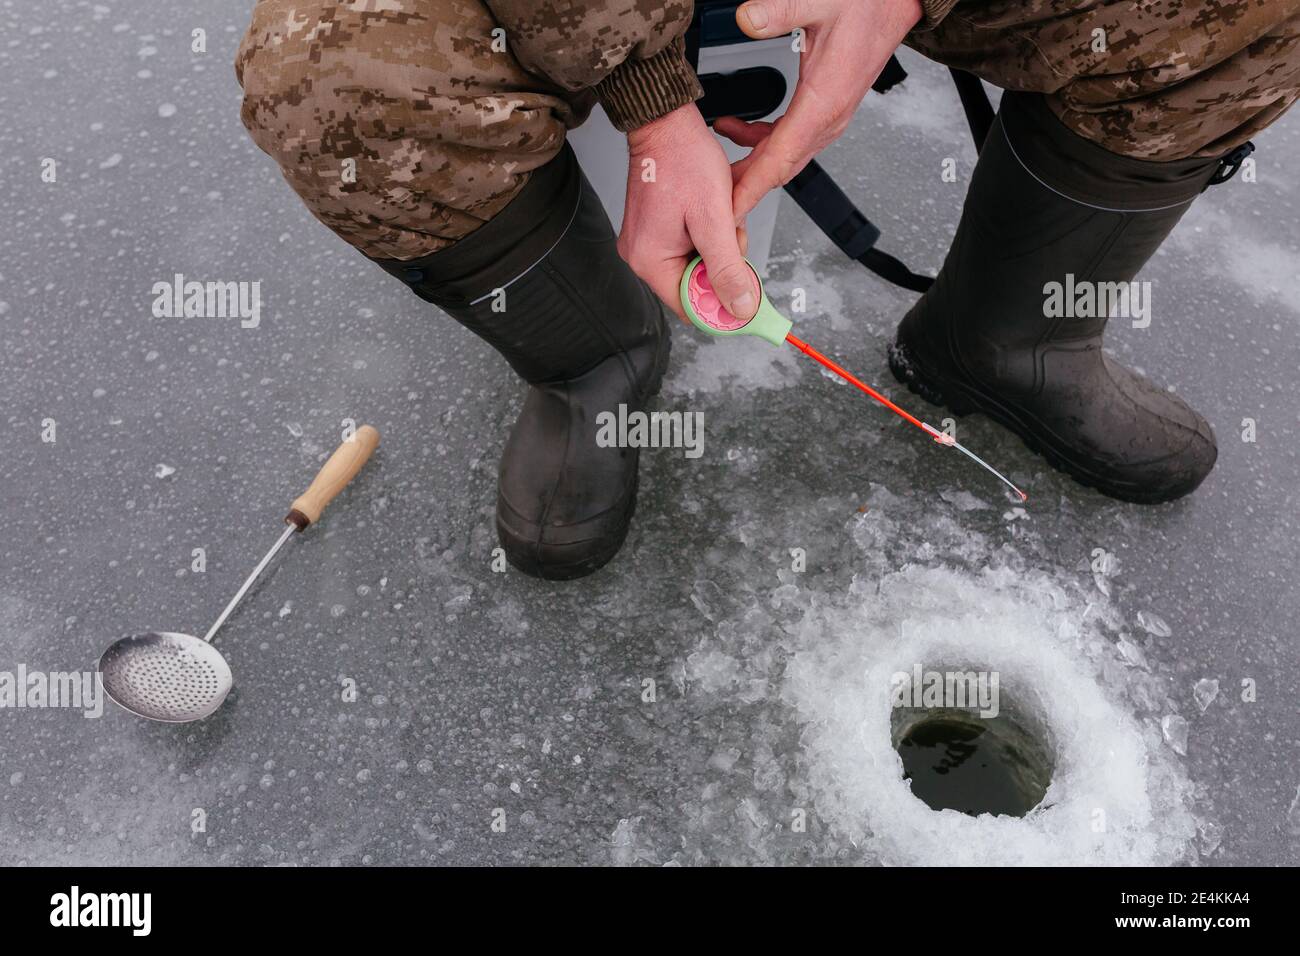 Faceless fisherman jiggling bait in an ice hole. Winter fishing on ice. Ice fishing. Man catching fish from ice  Stock Photo